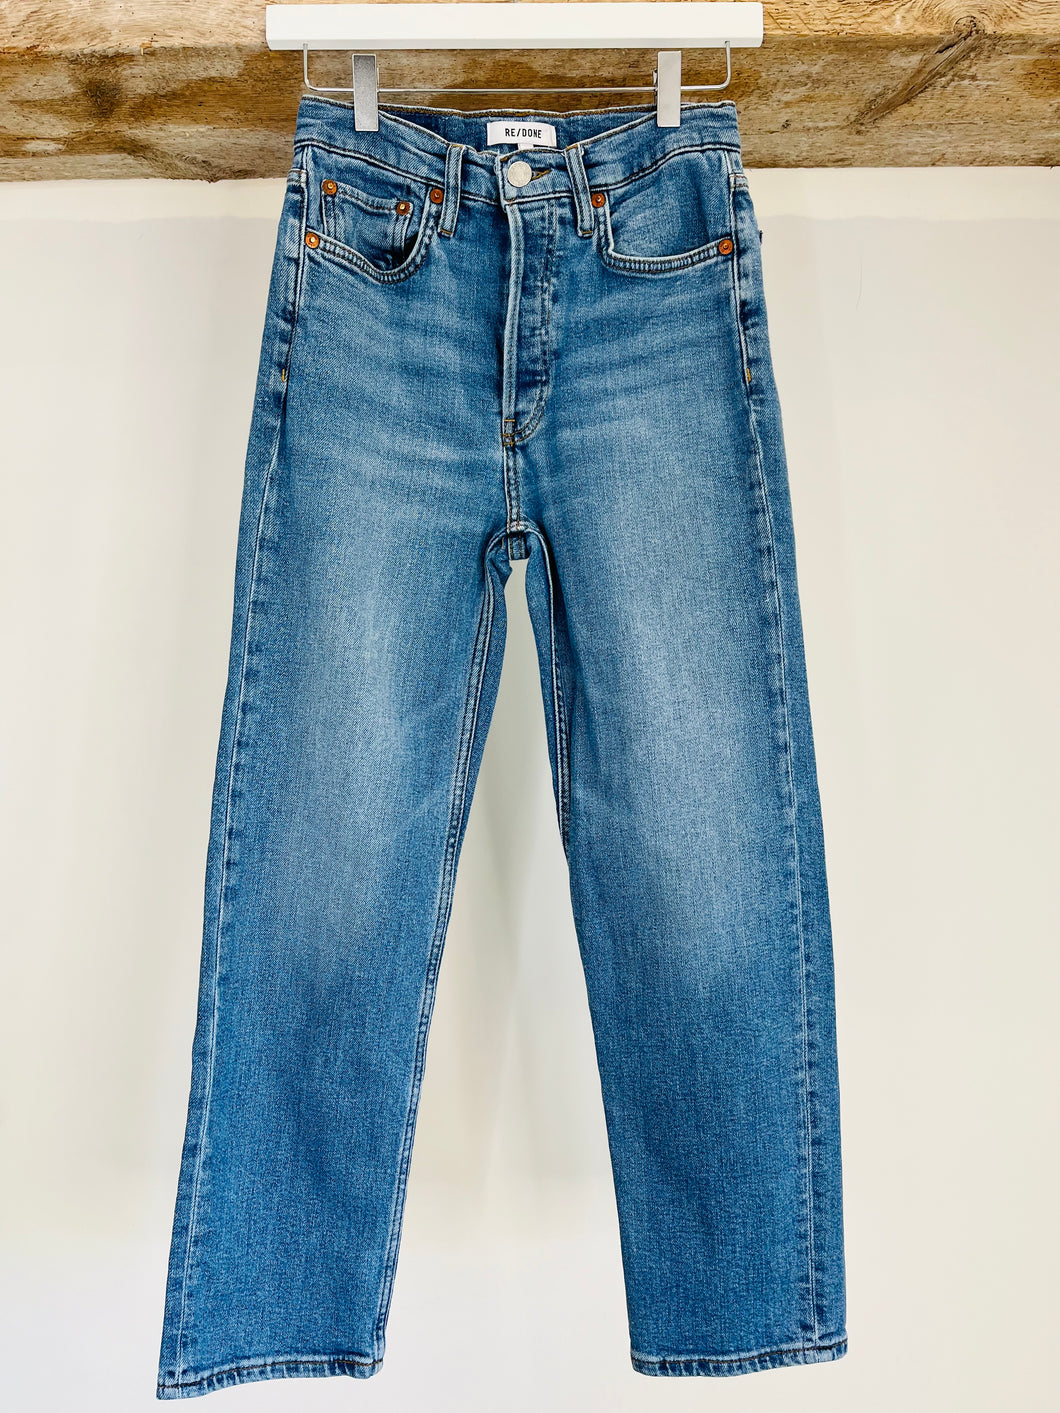 70's Stove Pipe Jeans - Size 27